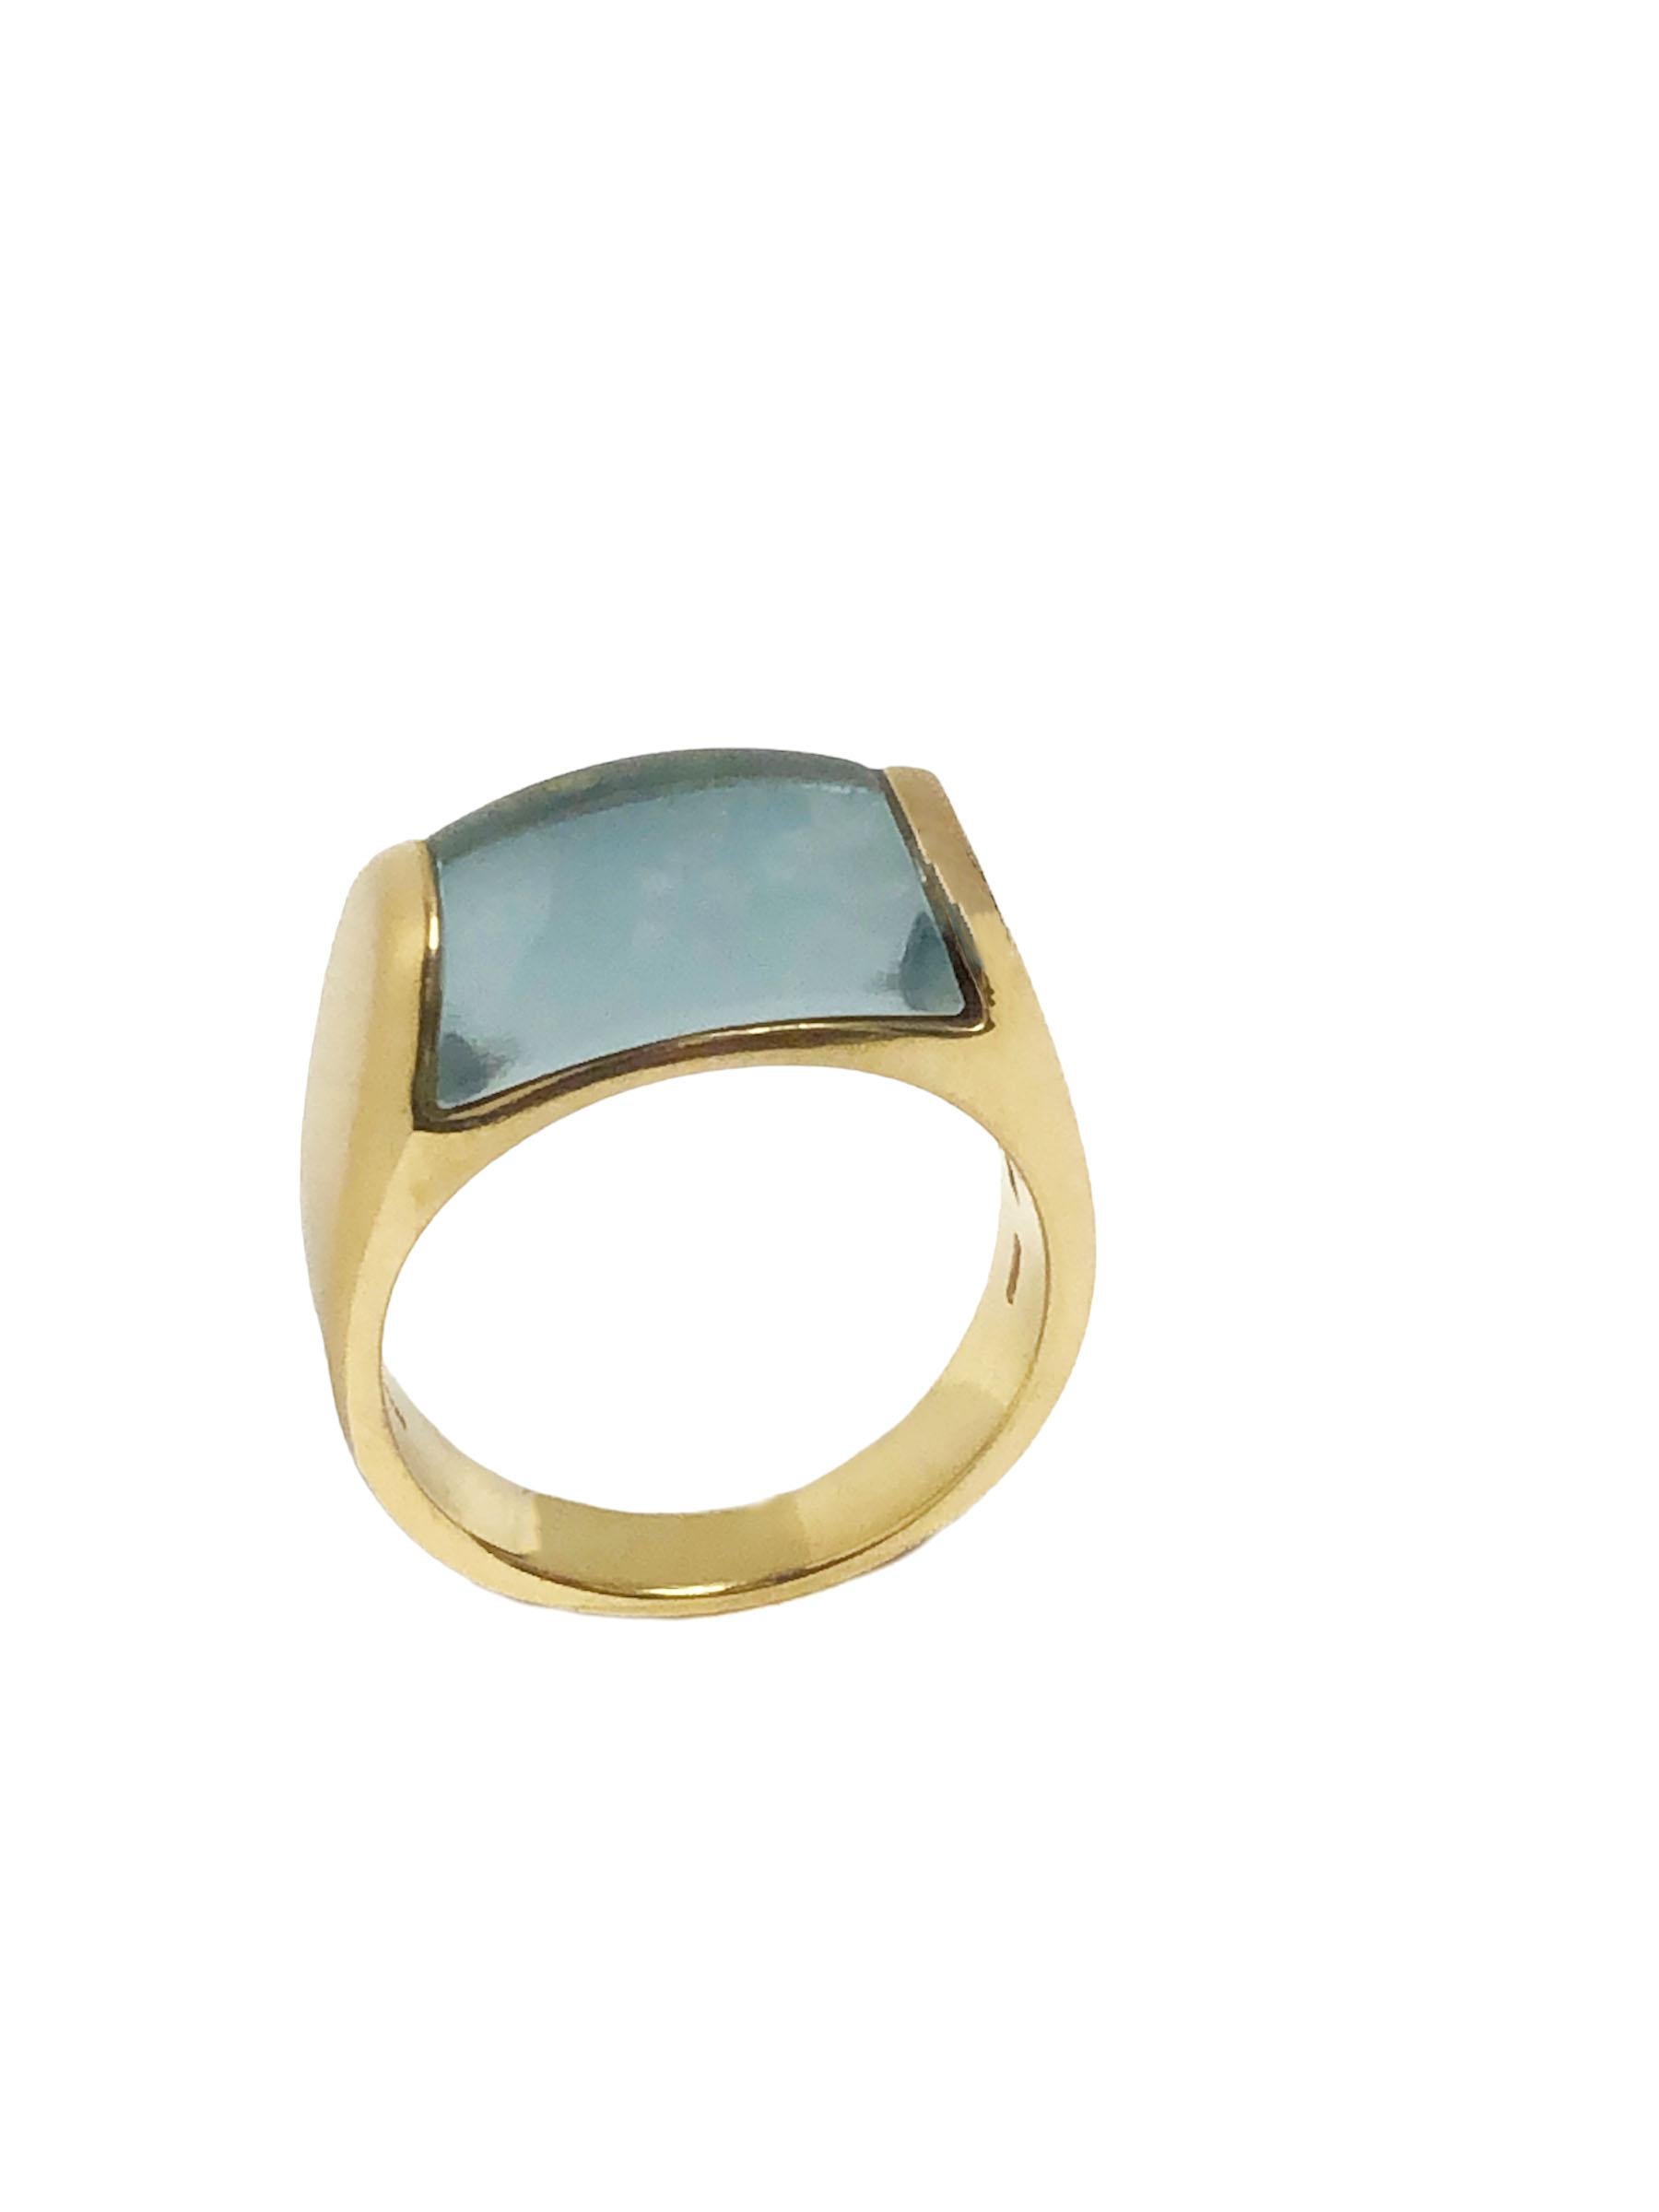 Circa 1990s Bulgari Tronchetto Collection Ring, 18k Yellow Gold and set with a Domed Cabochon Blue Topaz, the top measuring 5/8 inch across. Finger size 6. Comes in original Presentation box with outer box.